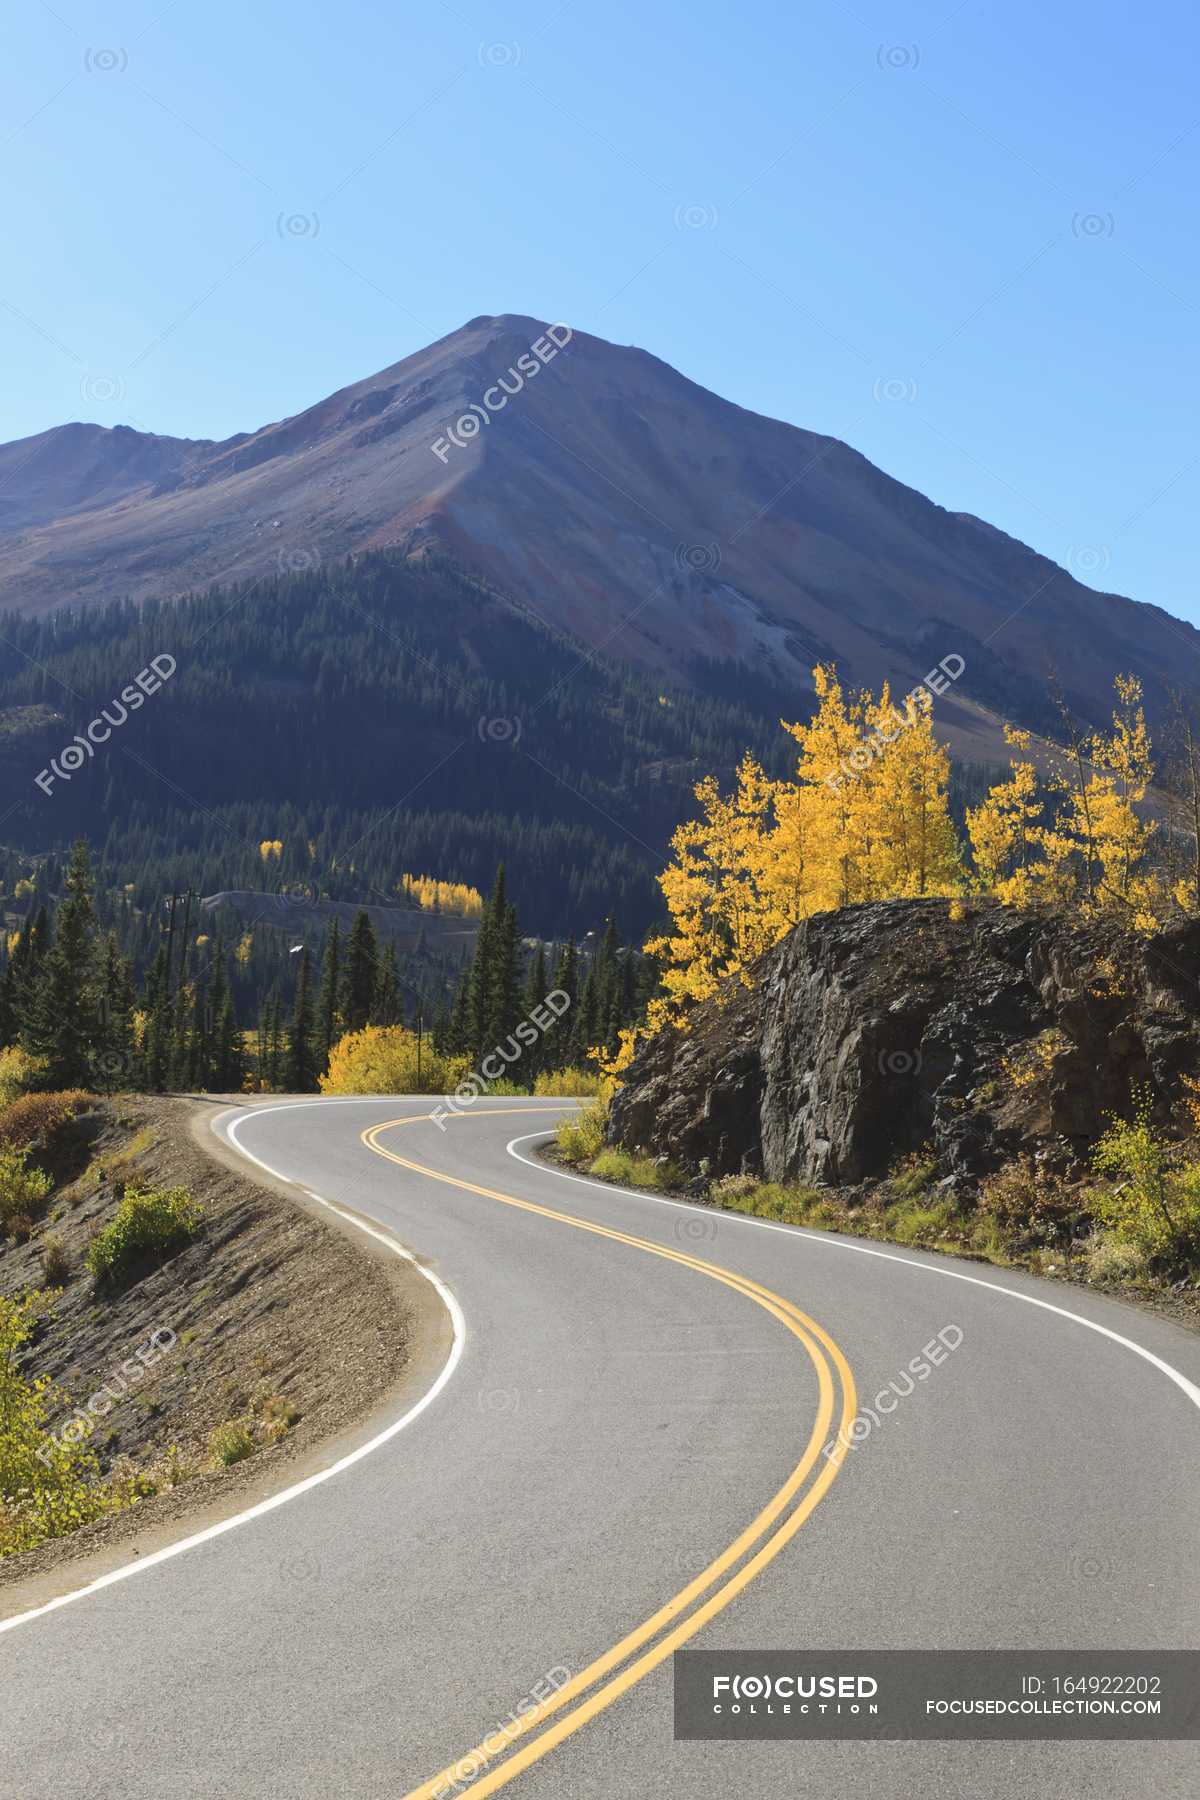 Curved Mountain Road — Stock Photo | #164922202